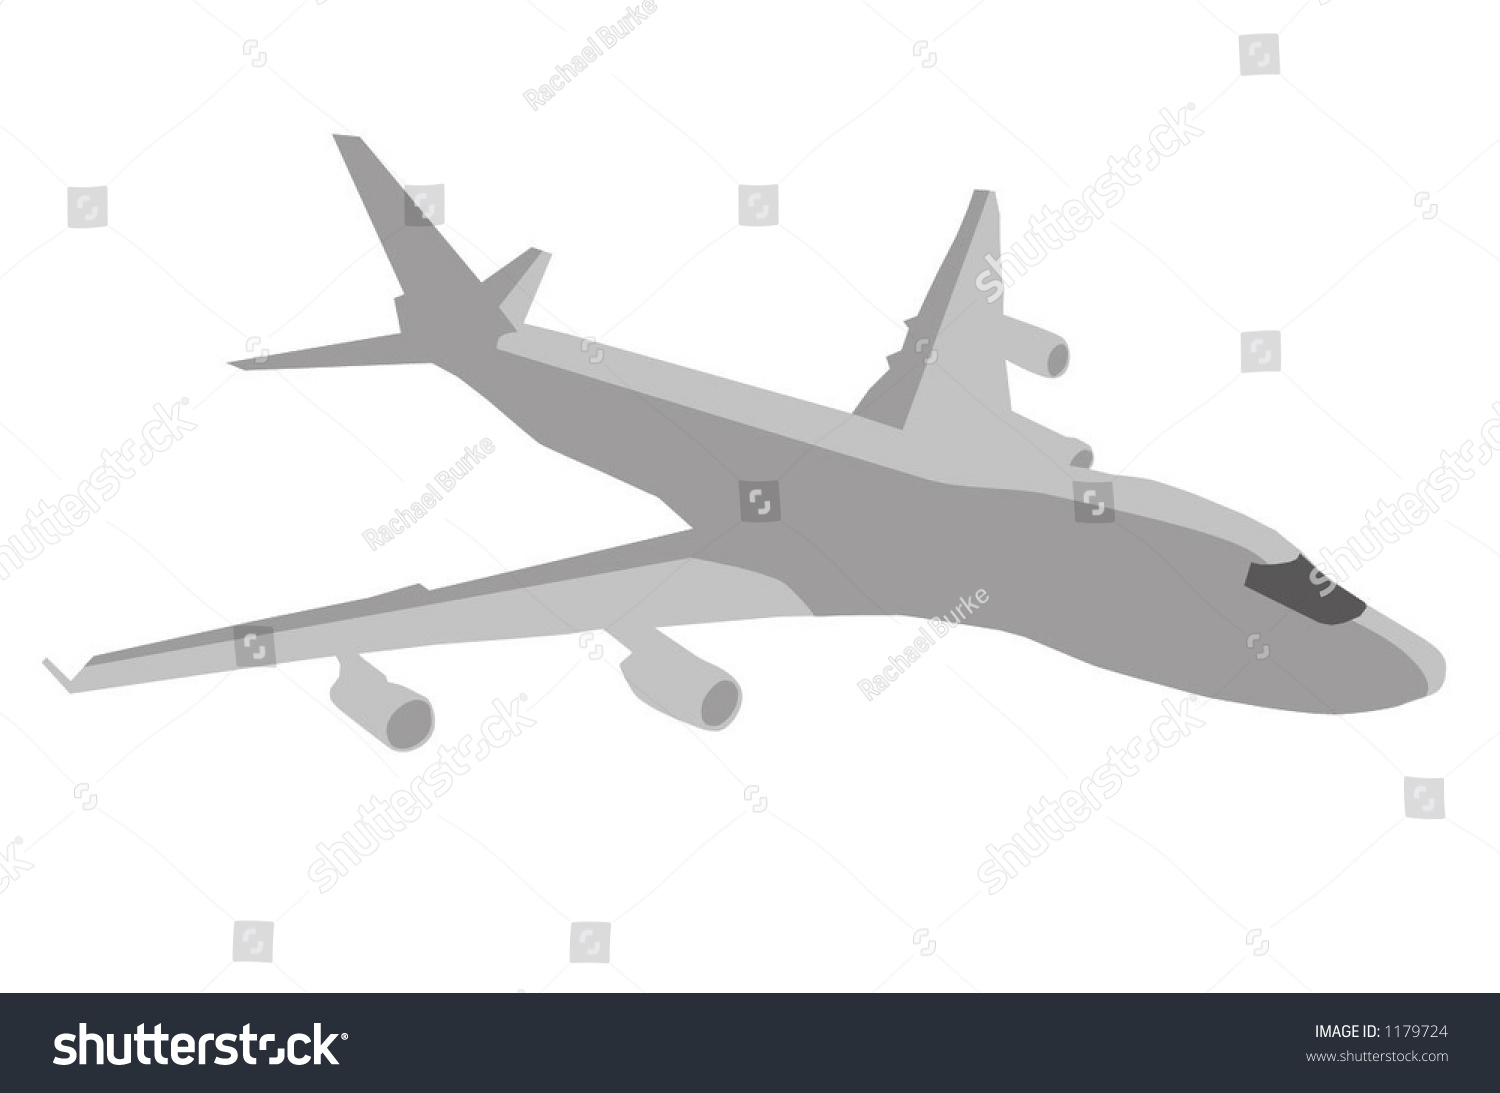 SVG of Vector 747 Airplane with shadows svg